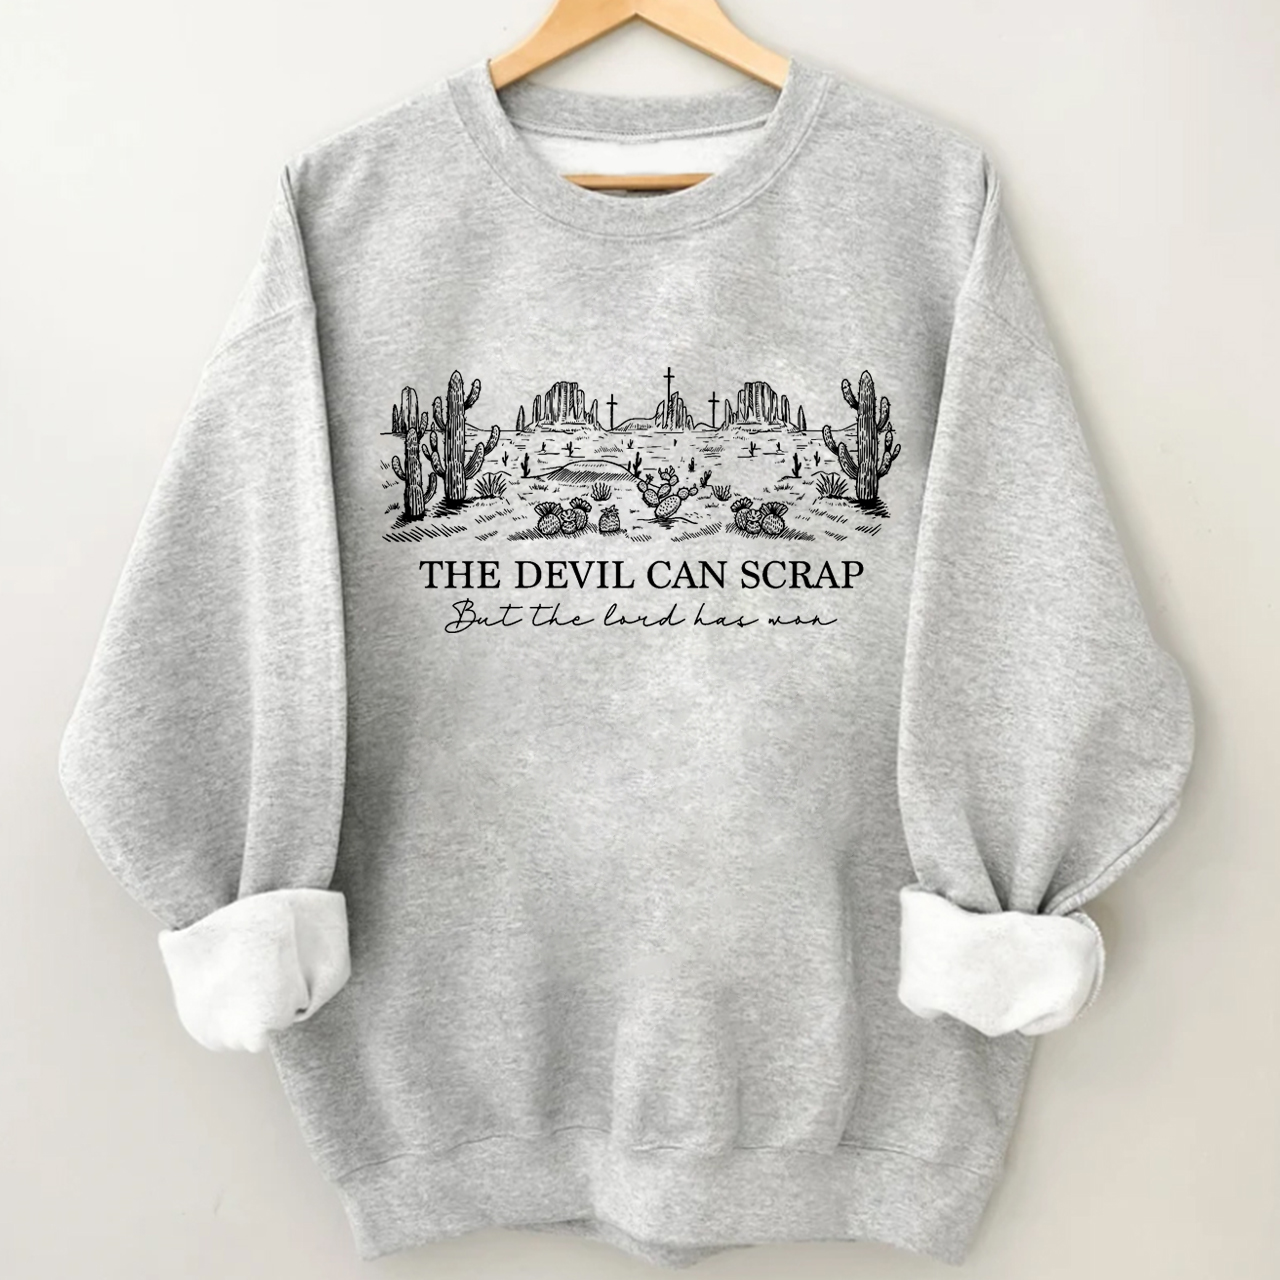 The Devil Can Scrap But The Lord Has Won Sweatshirt